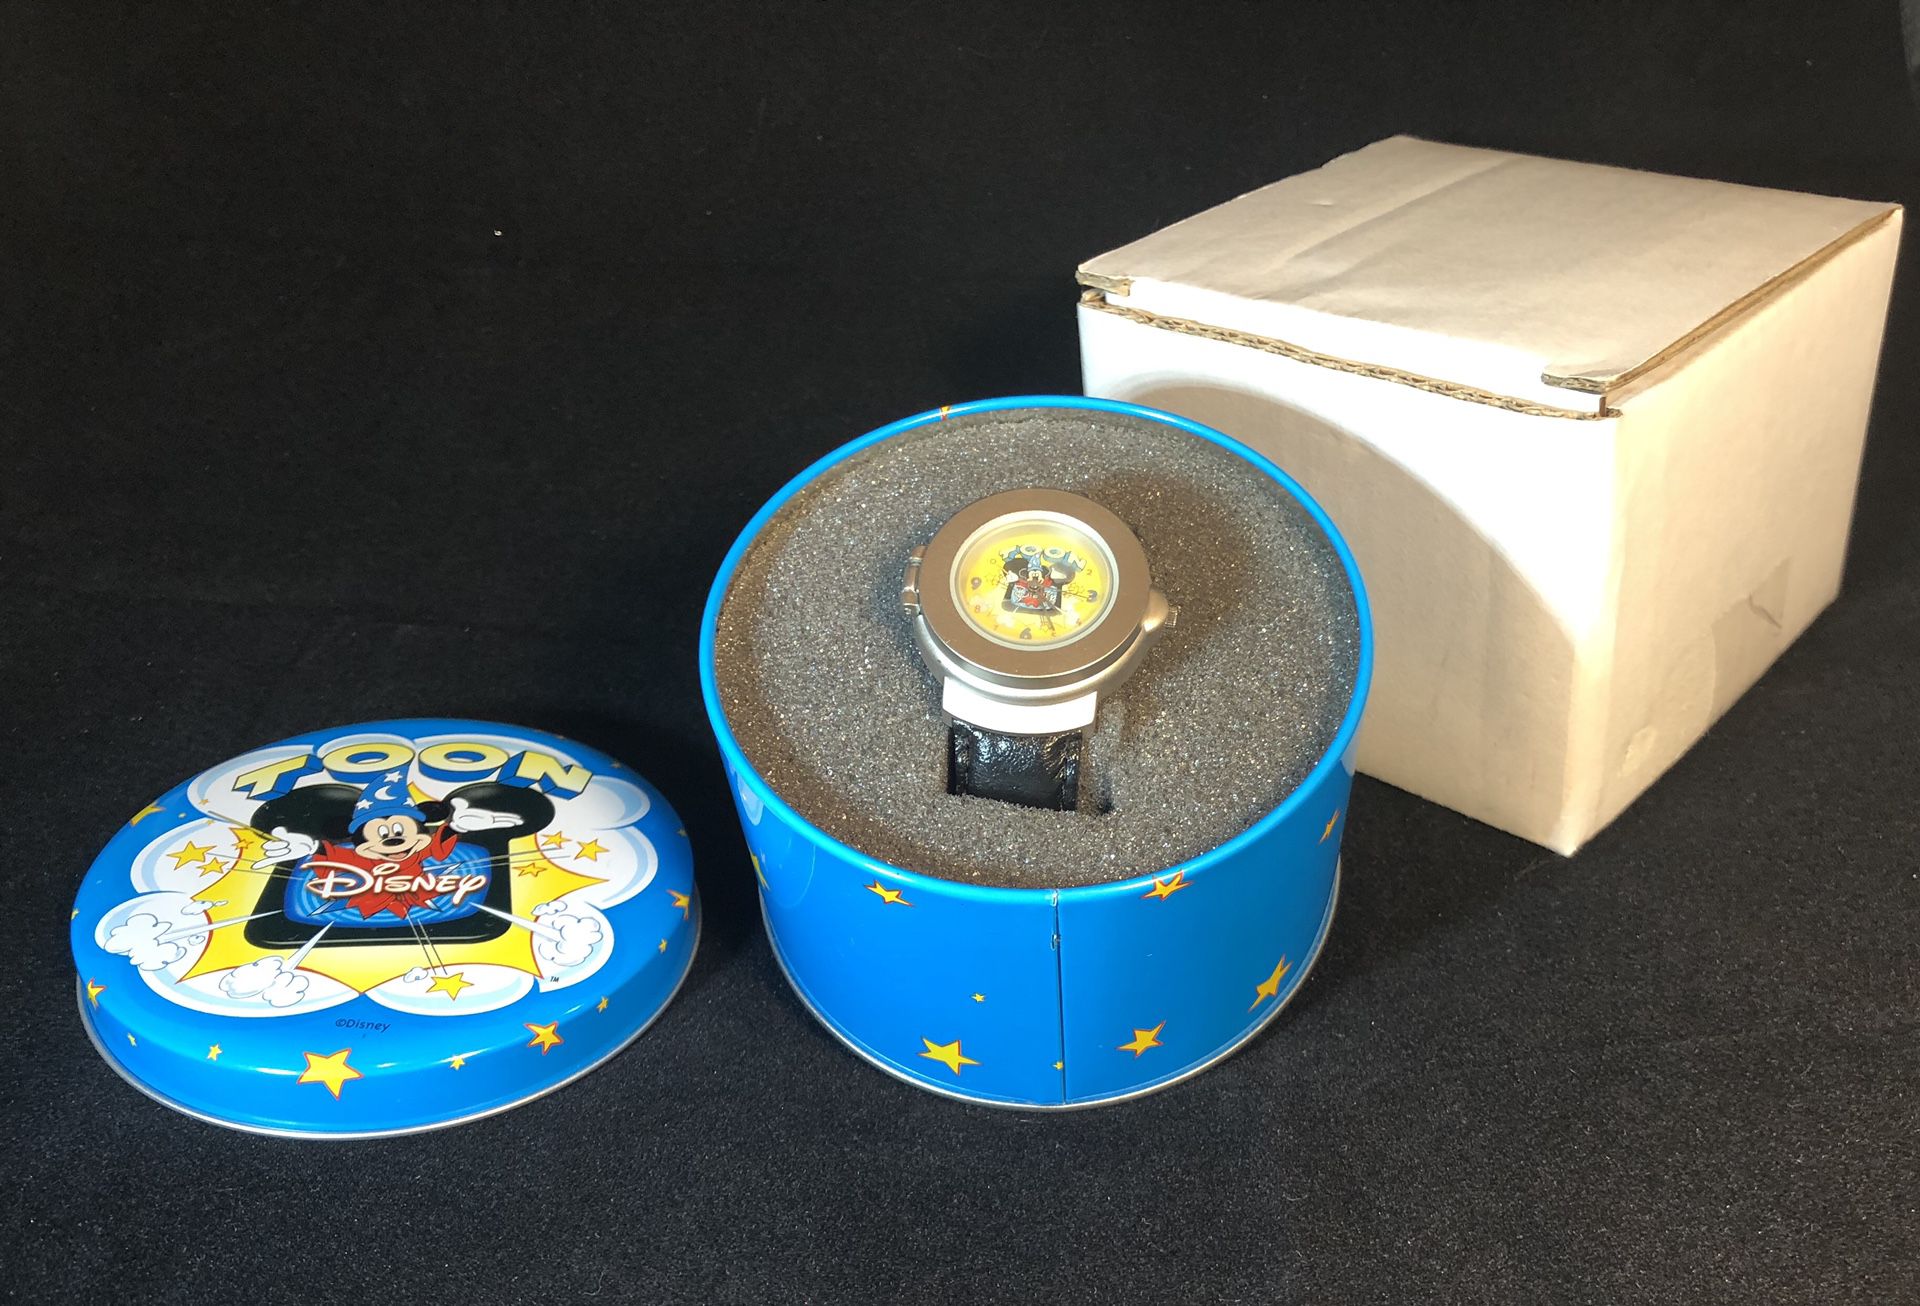 Disney Mickey Mouse Sorcerers Apprentice Toon 3D Pop-Up Watch, Limited Edition - Vintage